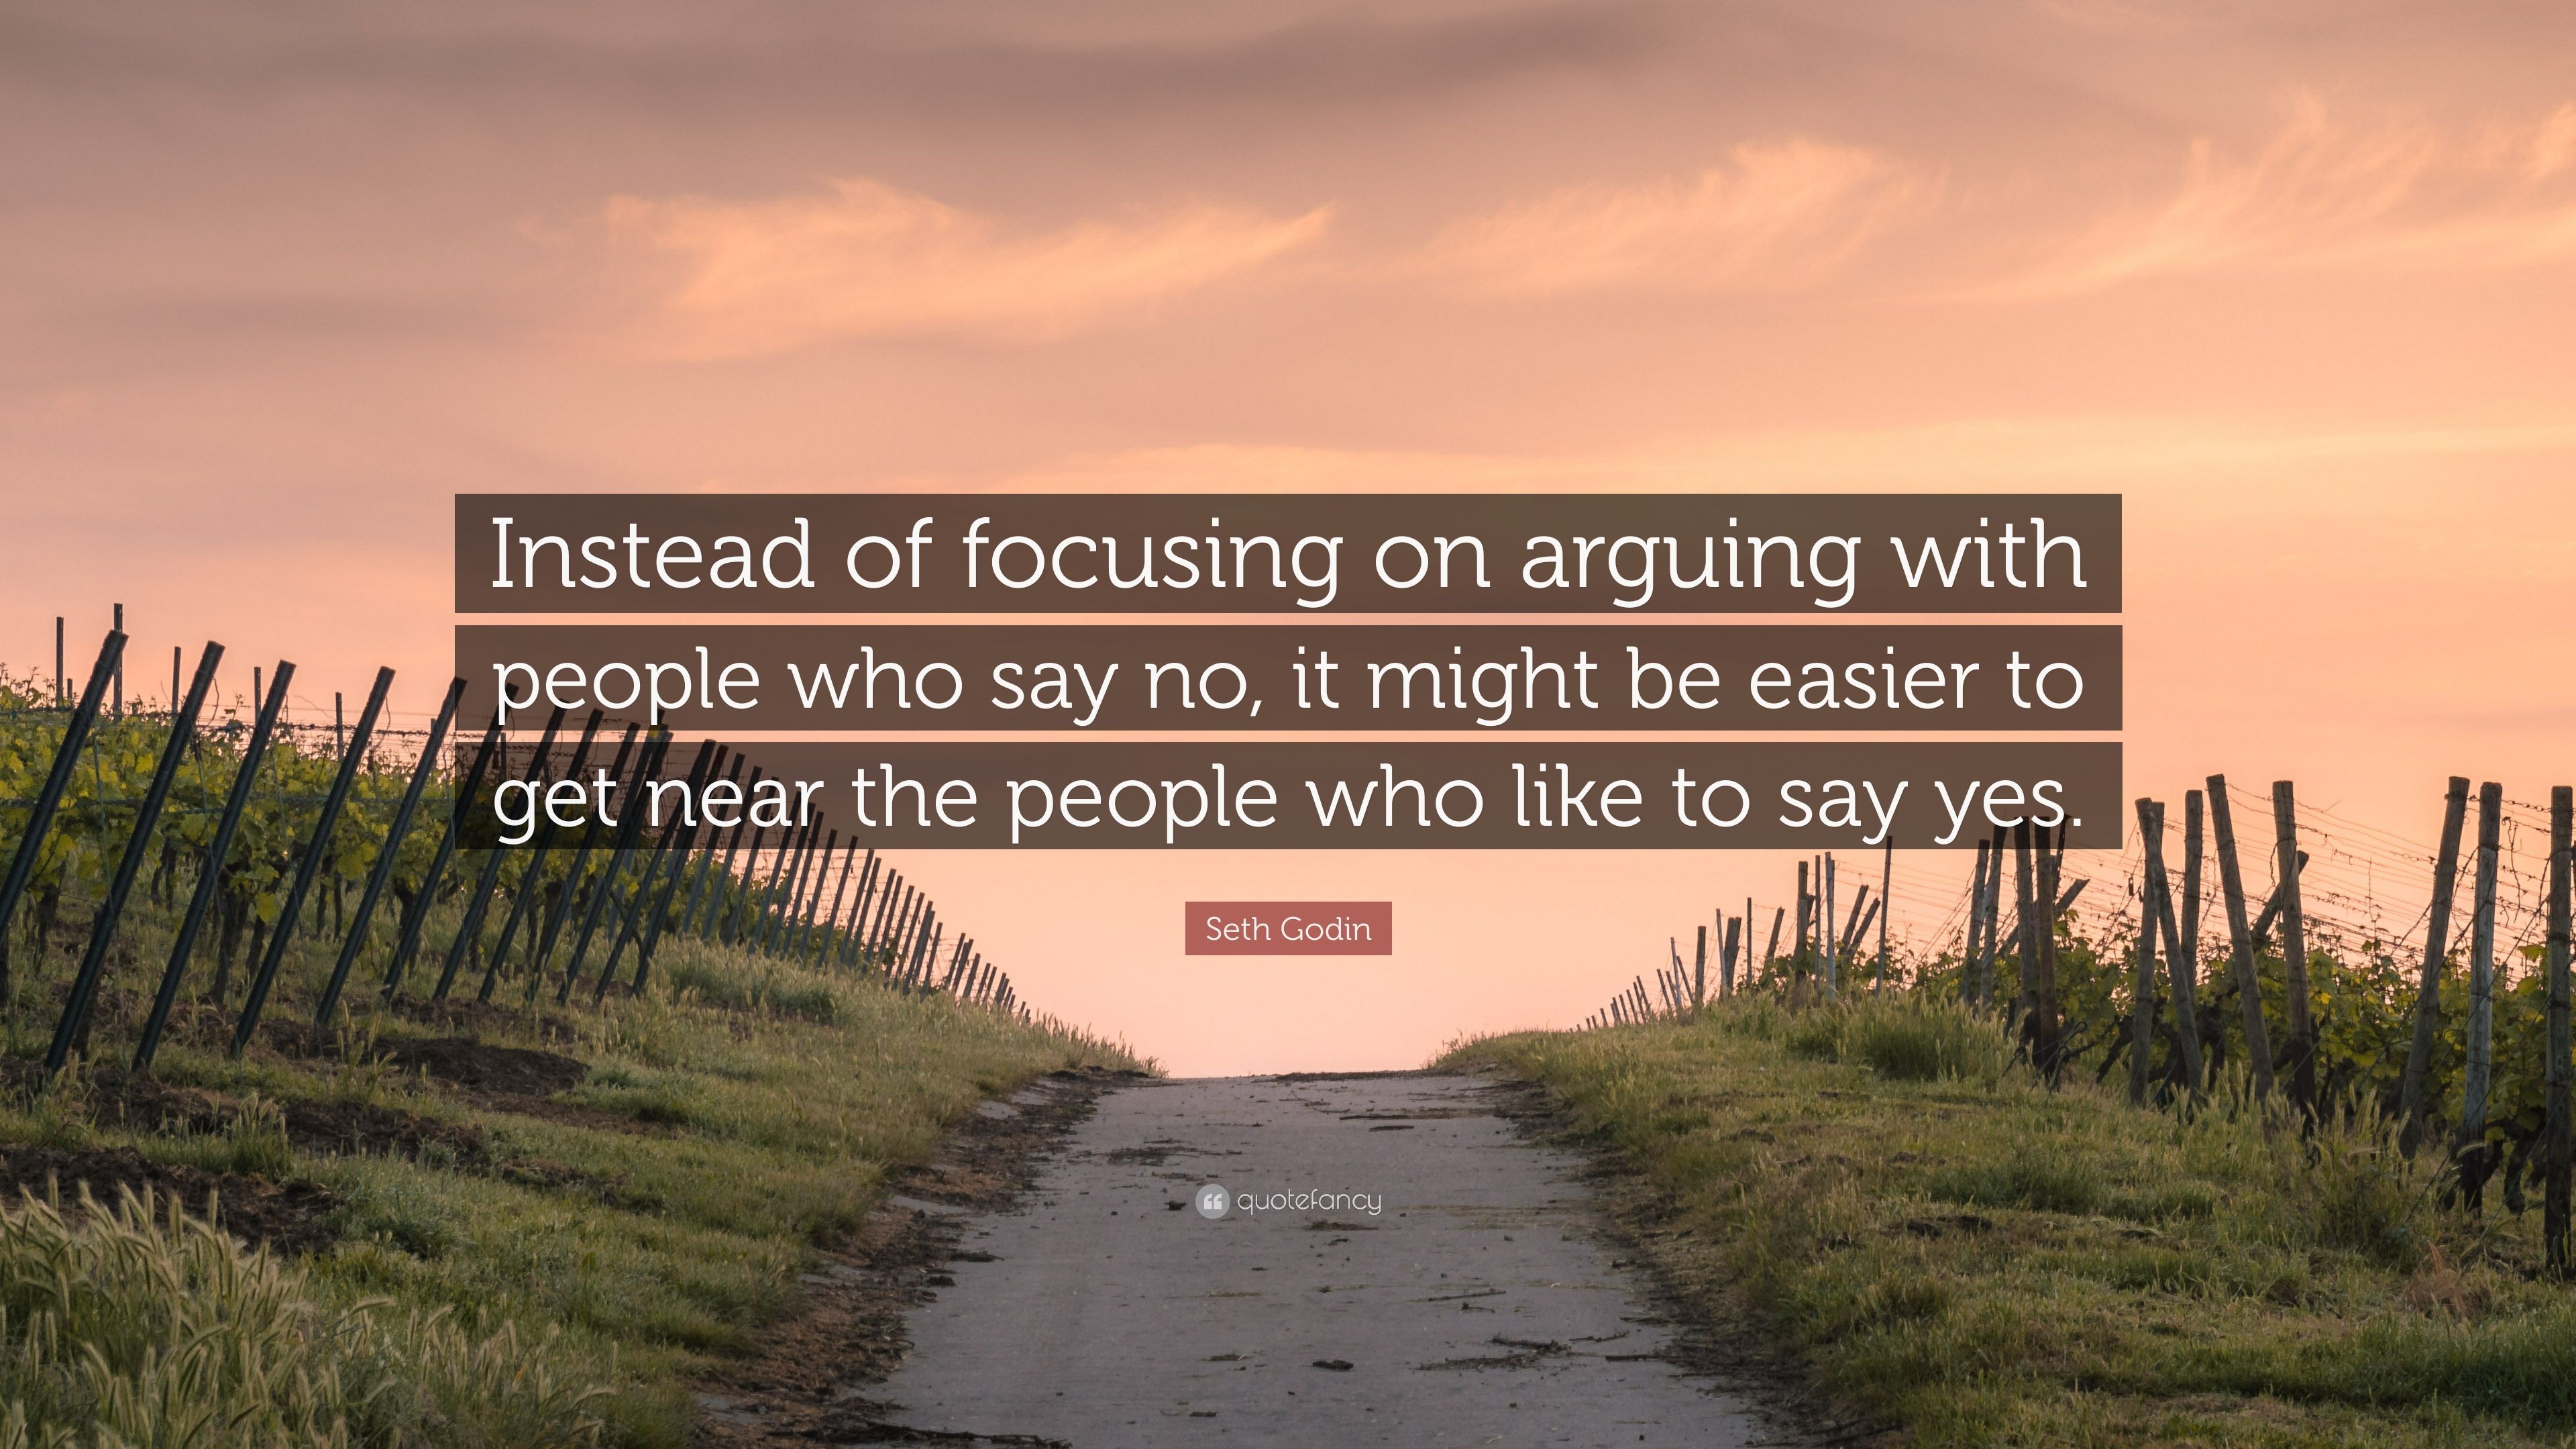 Seth Godin Quote: “Instead of focusing on arguing with people who